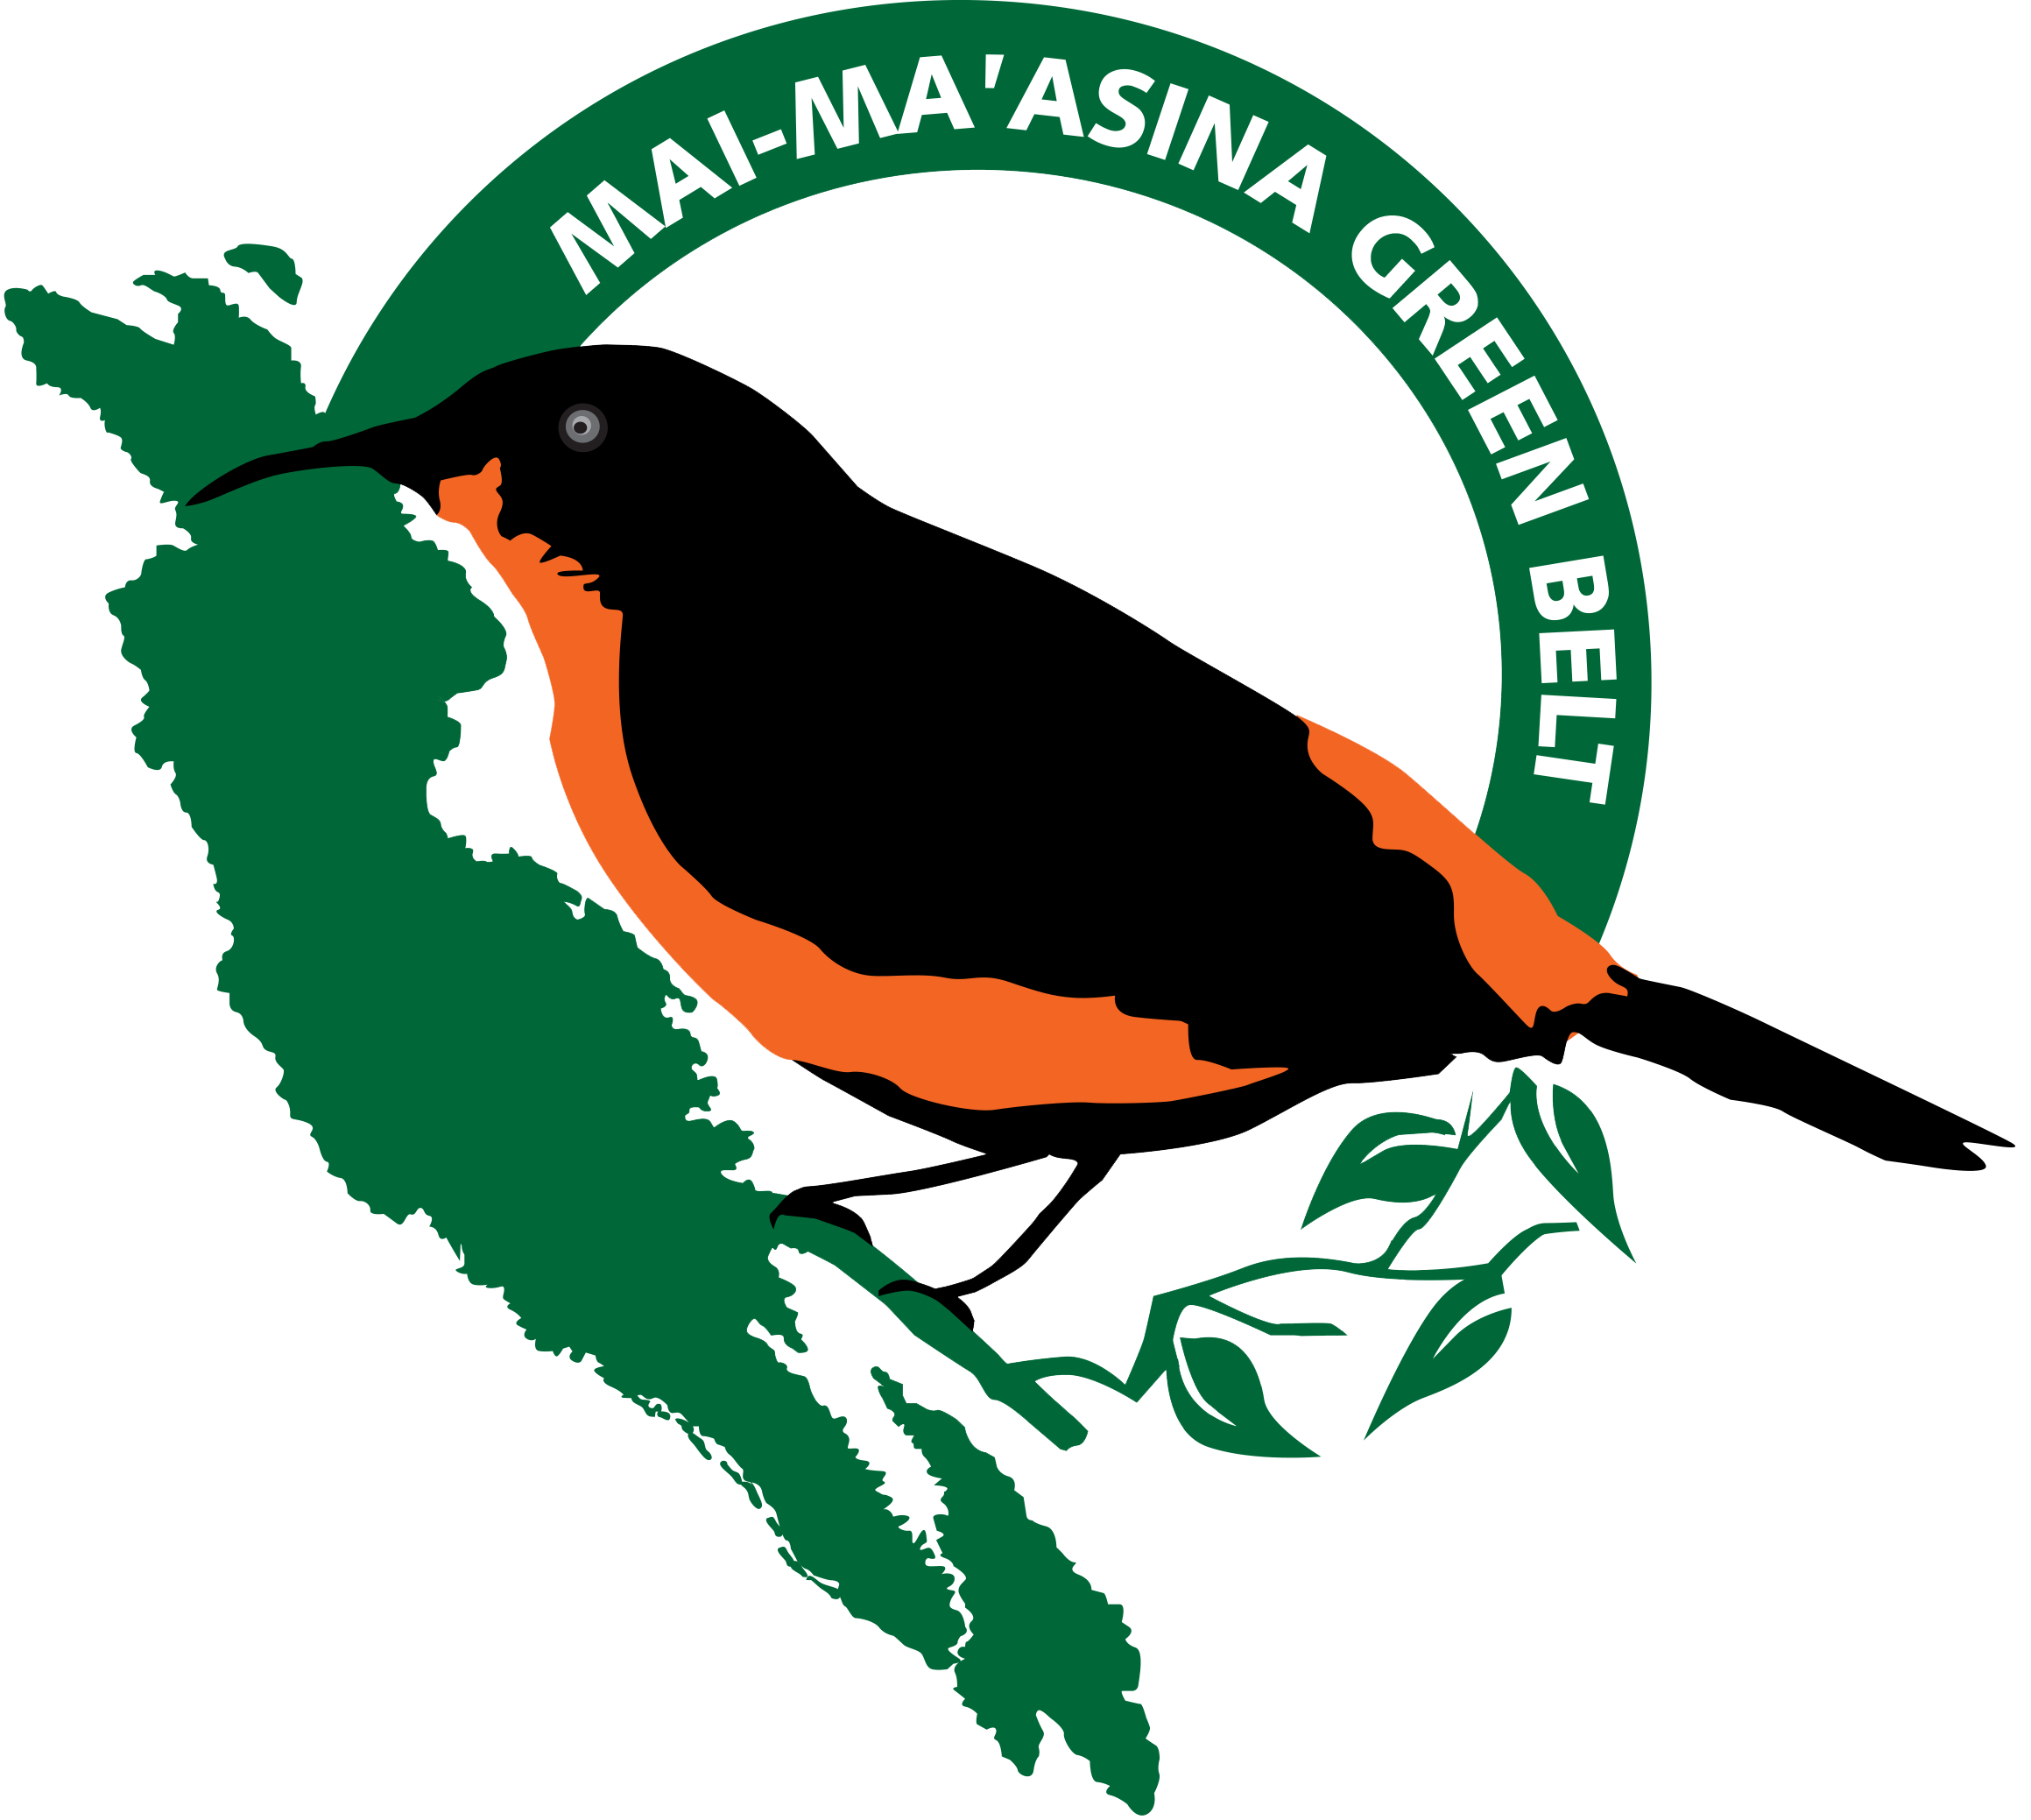 1. A logo of Mai-Ma'asina Green Belt featuring a lively bird perched on a branch.